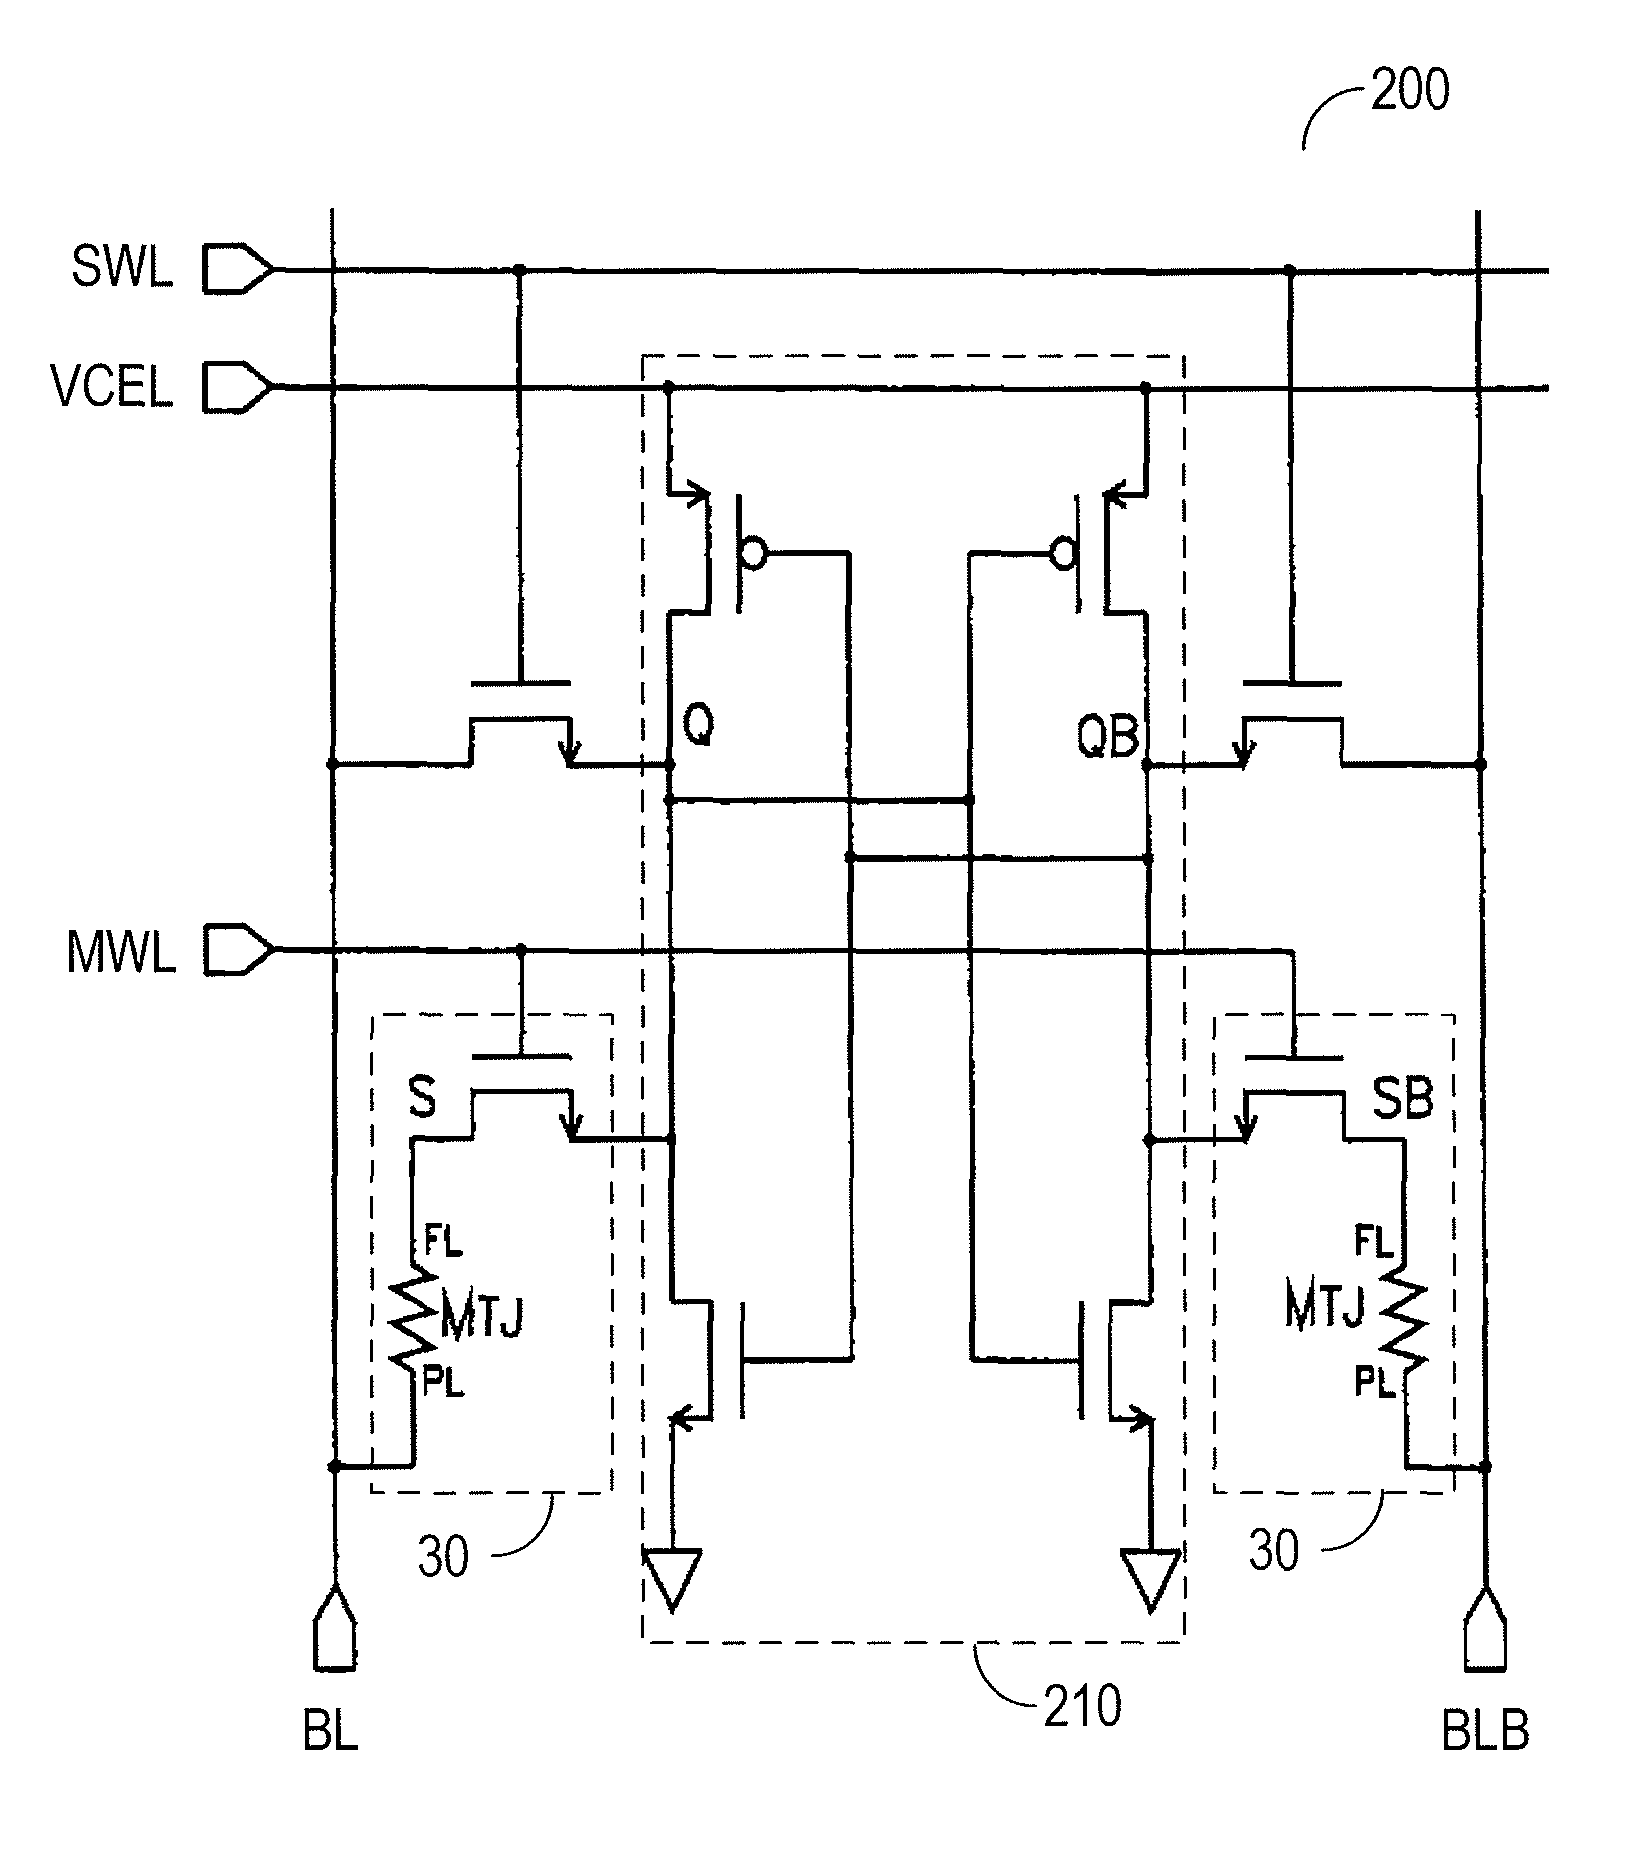 Non-volatile static ram cell circuit and timing method